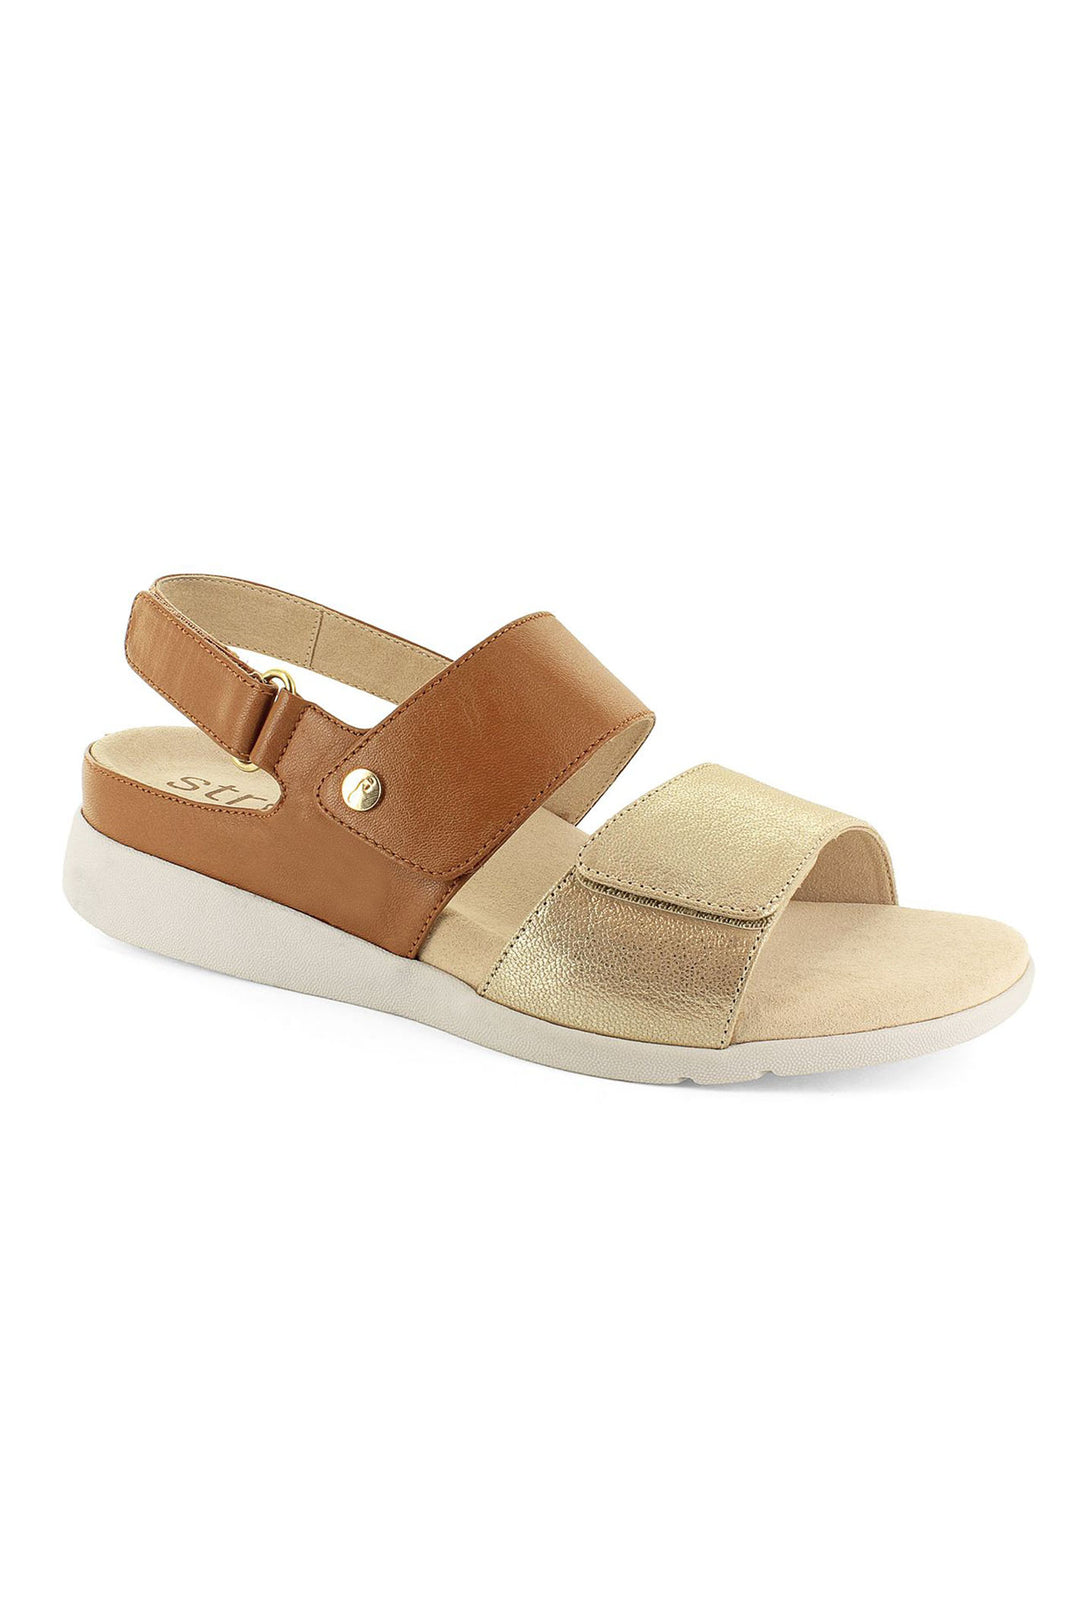 Strive Riviera Tan Brown Velco Strap Memory Foam Footbed Leather Sandal - Shirley Allum Boutique